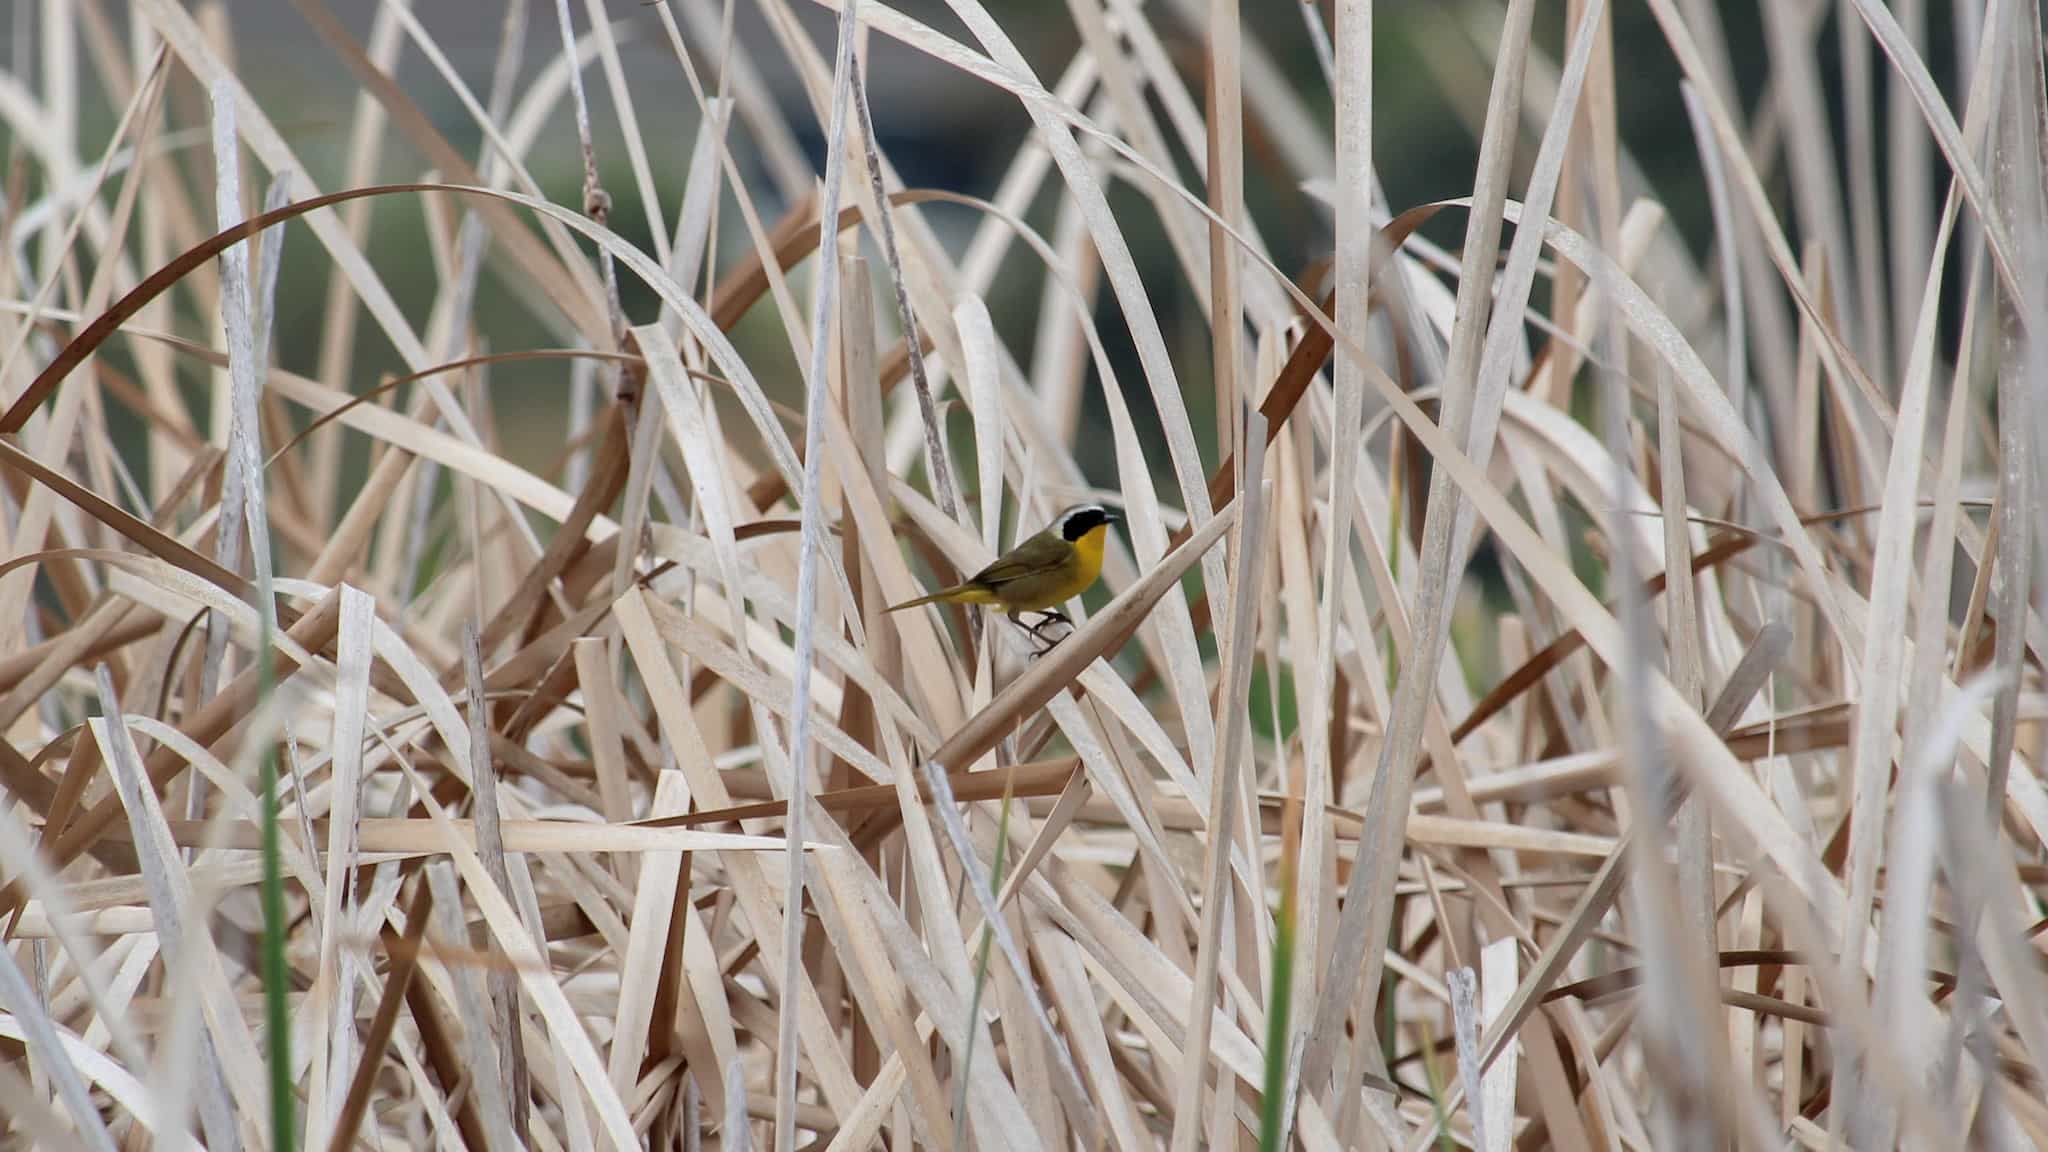 A black and yellow bird stands in tall reeds